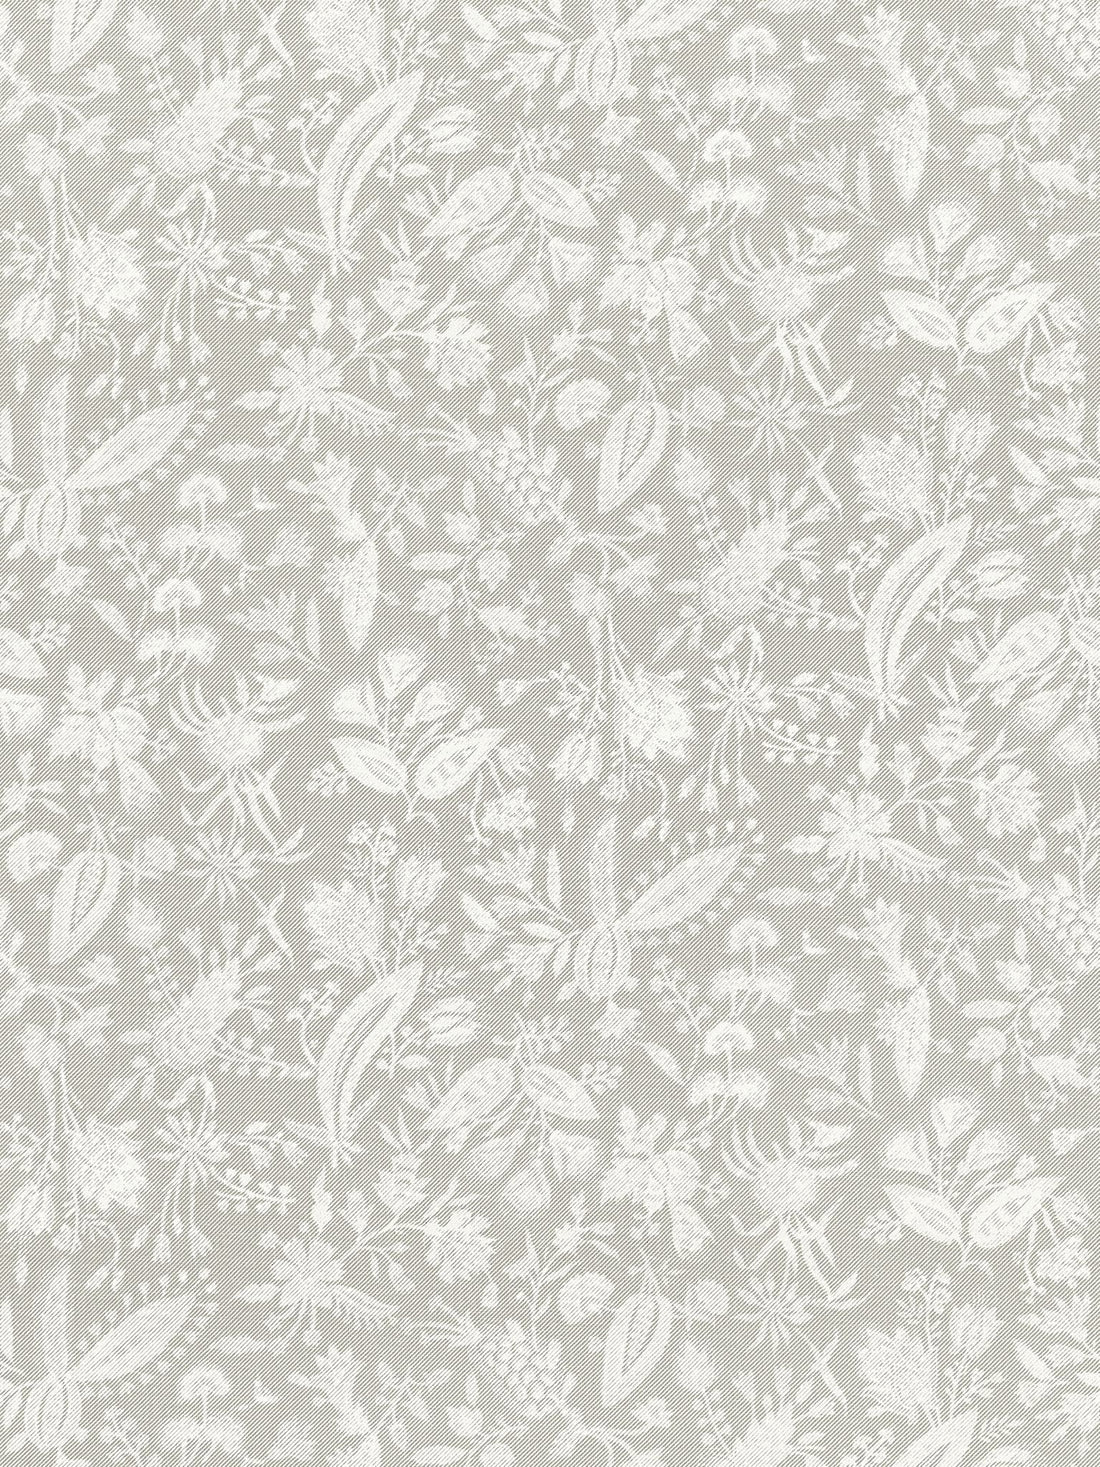 Tulia Linen Print fabric in french grey color - pattern number SC 000316605 - by Scalamandre in the Scalamandre Fabrics Book 1 collection